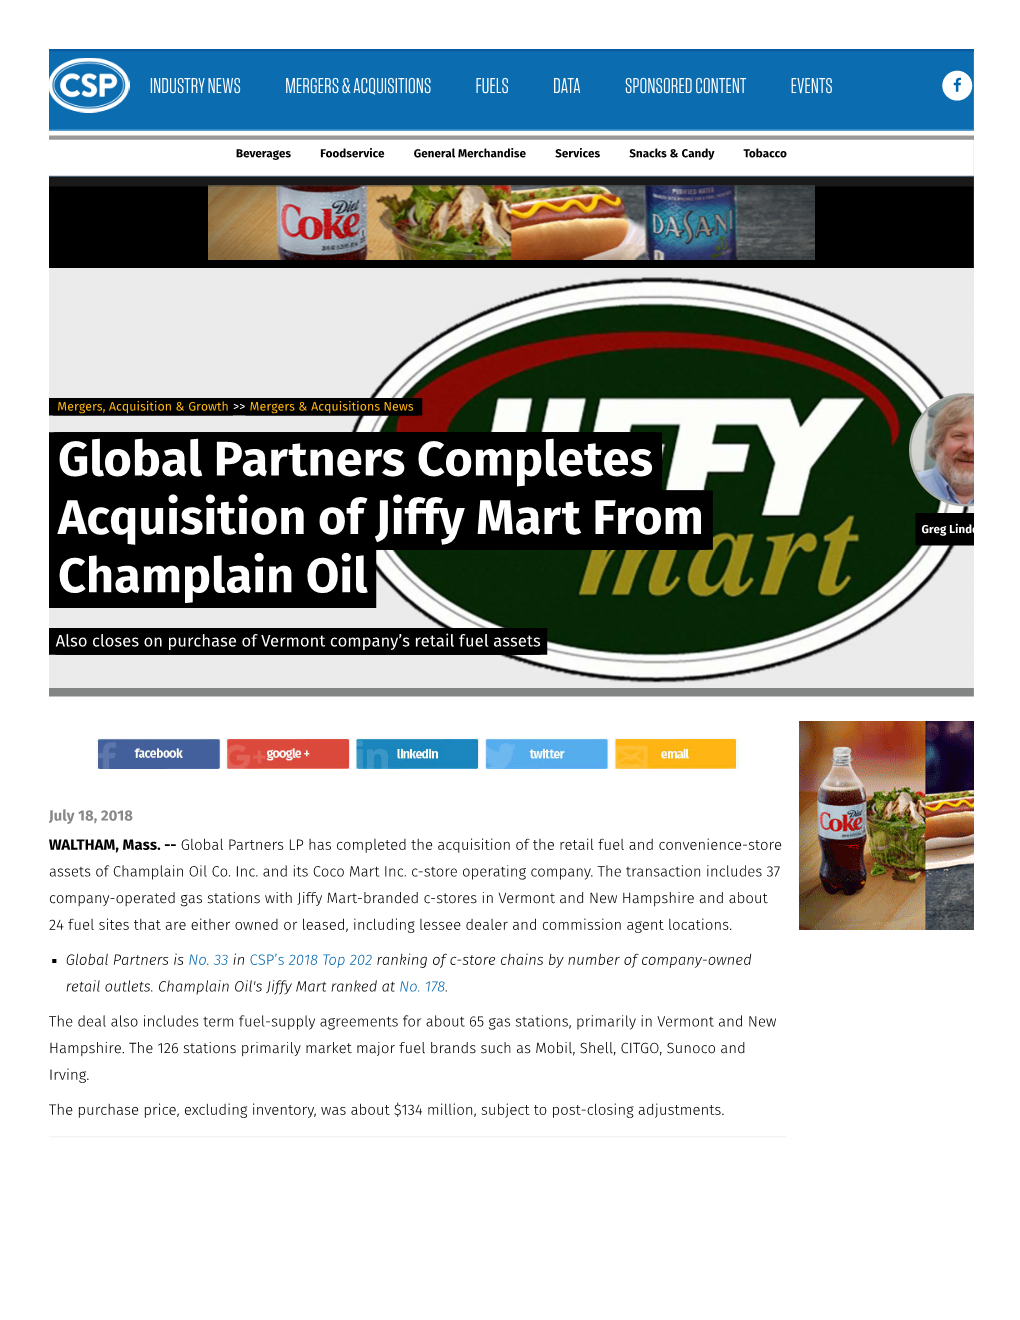 Global Partners Completes Acquisition of Jiffy Mart From